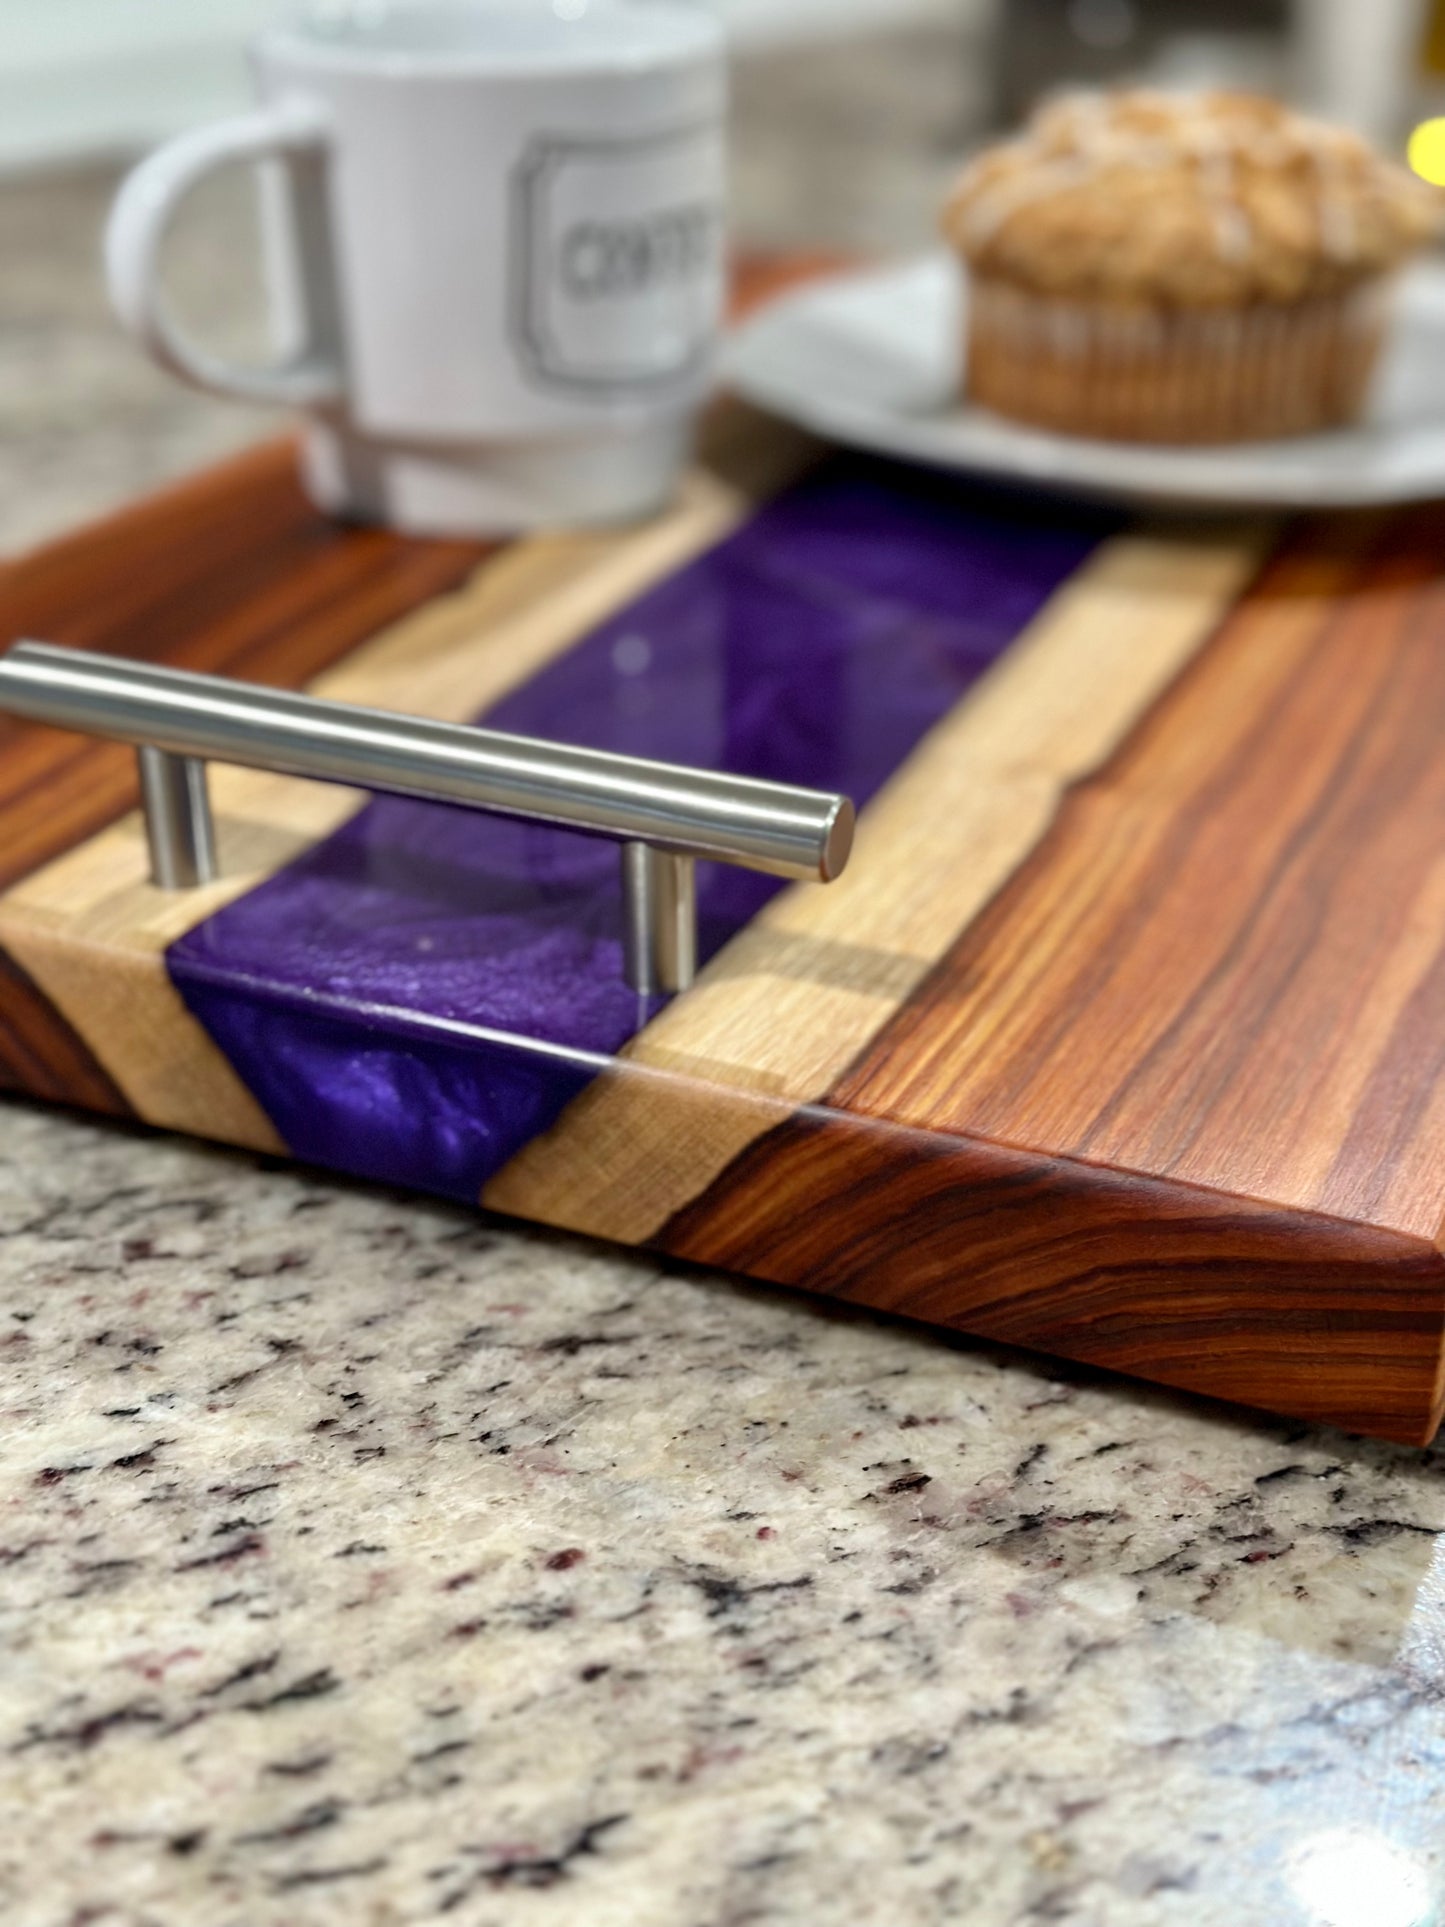 The Iris River Serving Tray